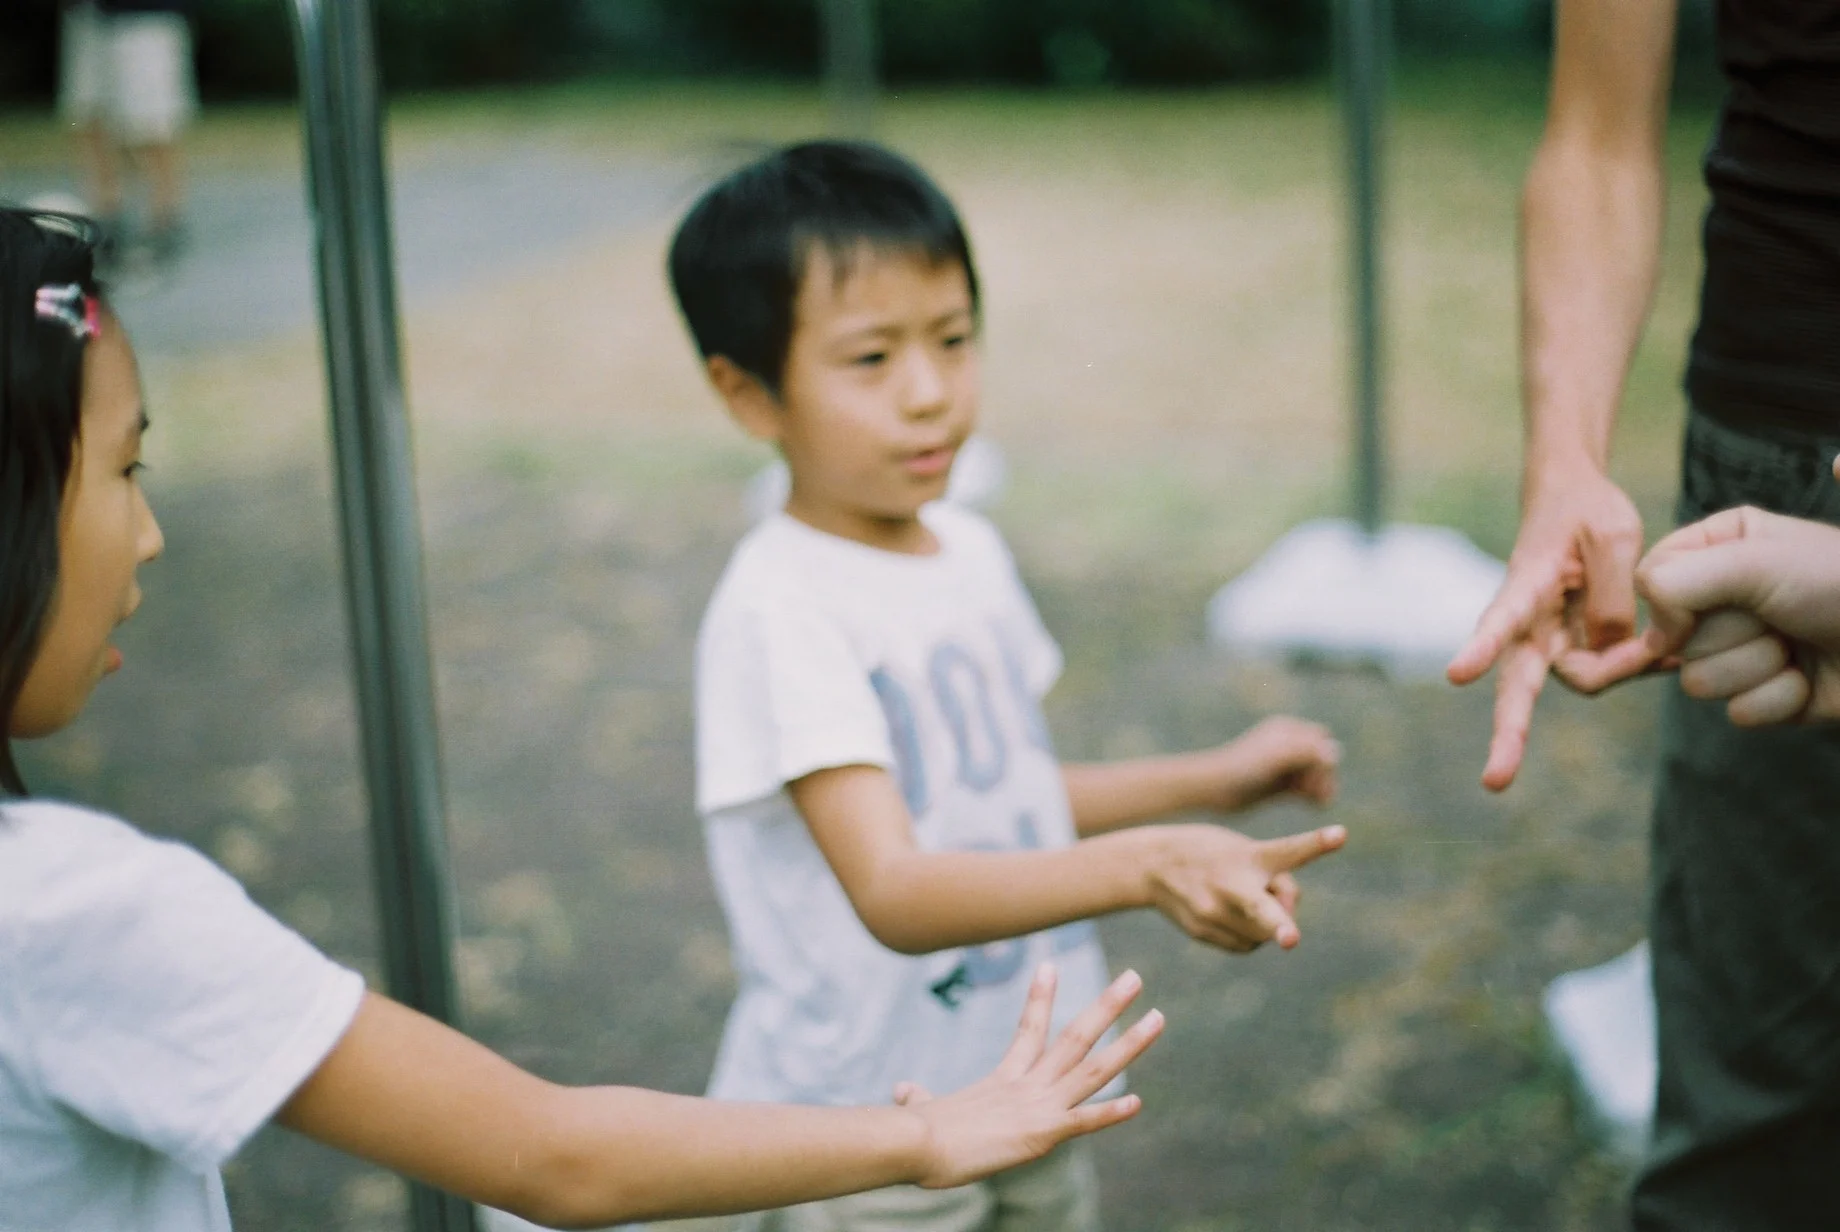 Four people, two children and two adults, play janken against one another outdoors. The girl chose paper, and the boy scissors, while the two adults (faces not shown) chose scissors and rock, resulting in a draw.